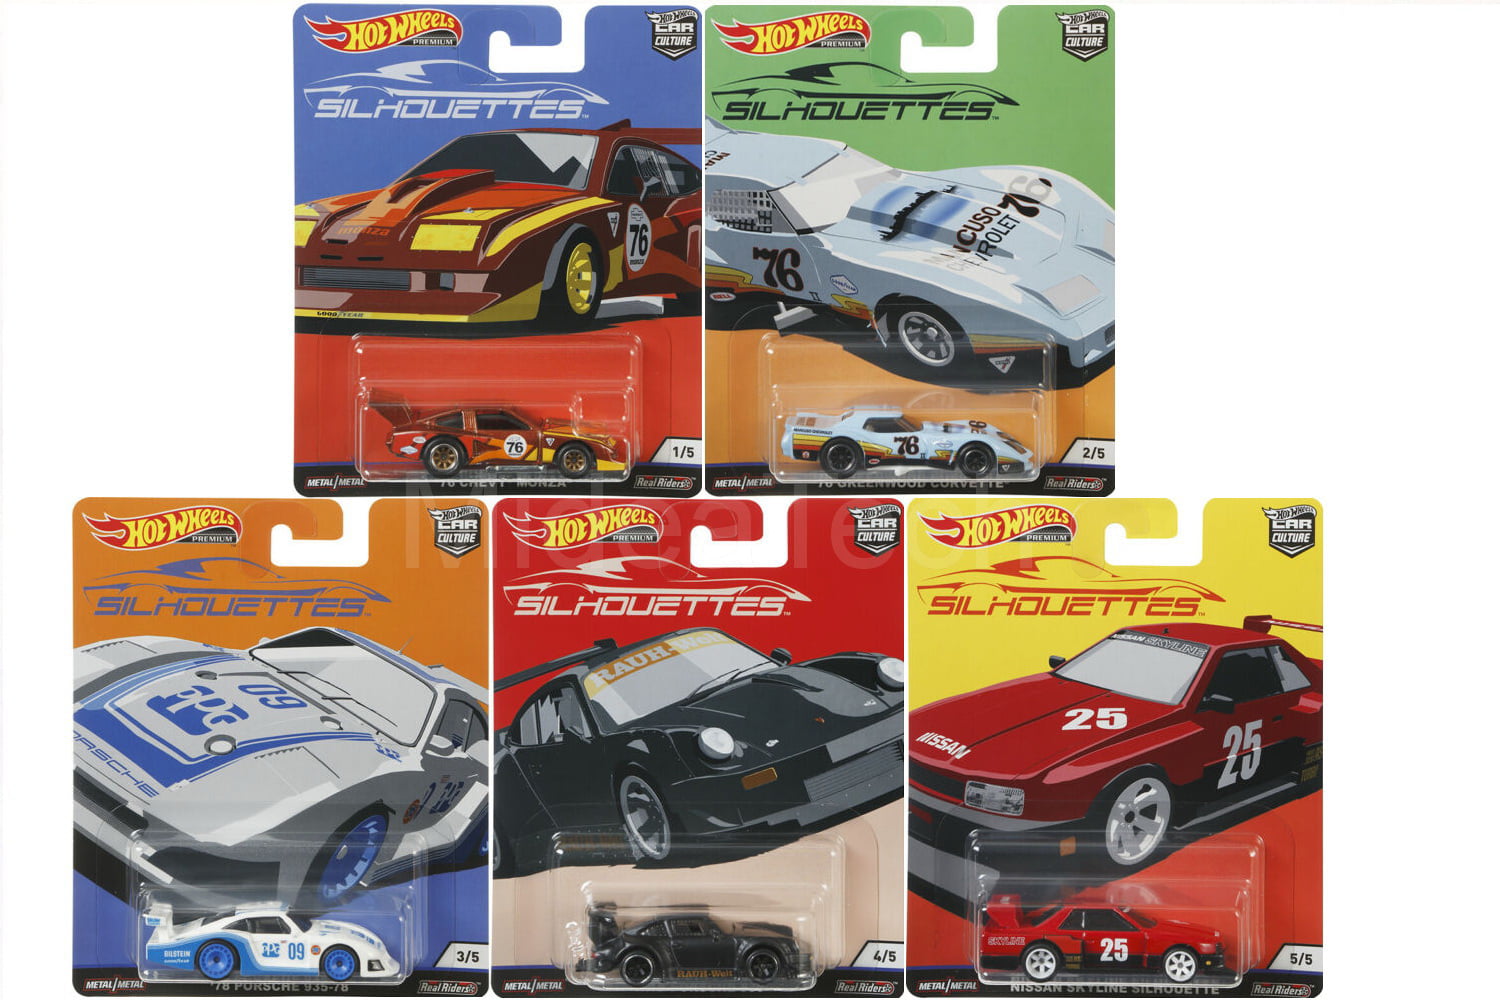 1:64 Hot Wheels premium 5 cars set by Raceface-modelcars 